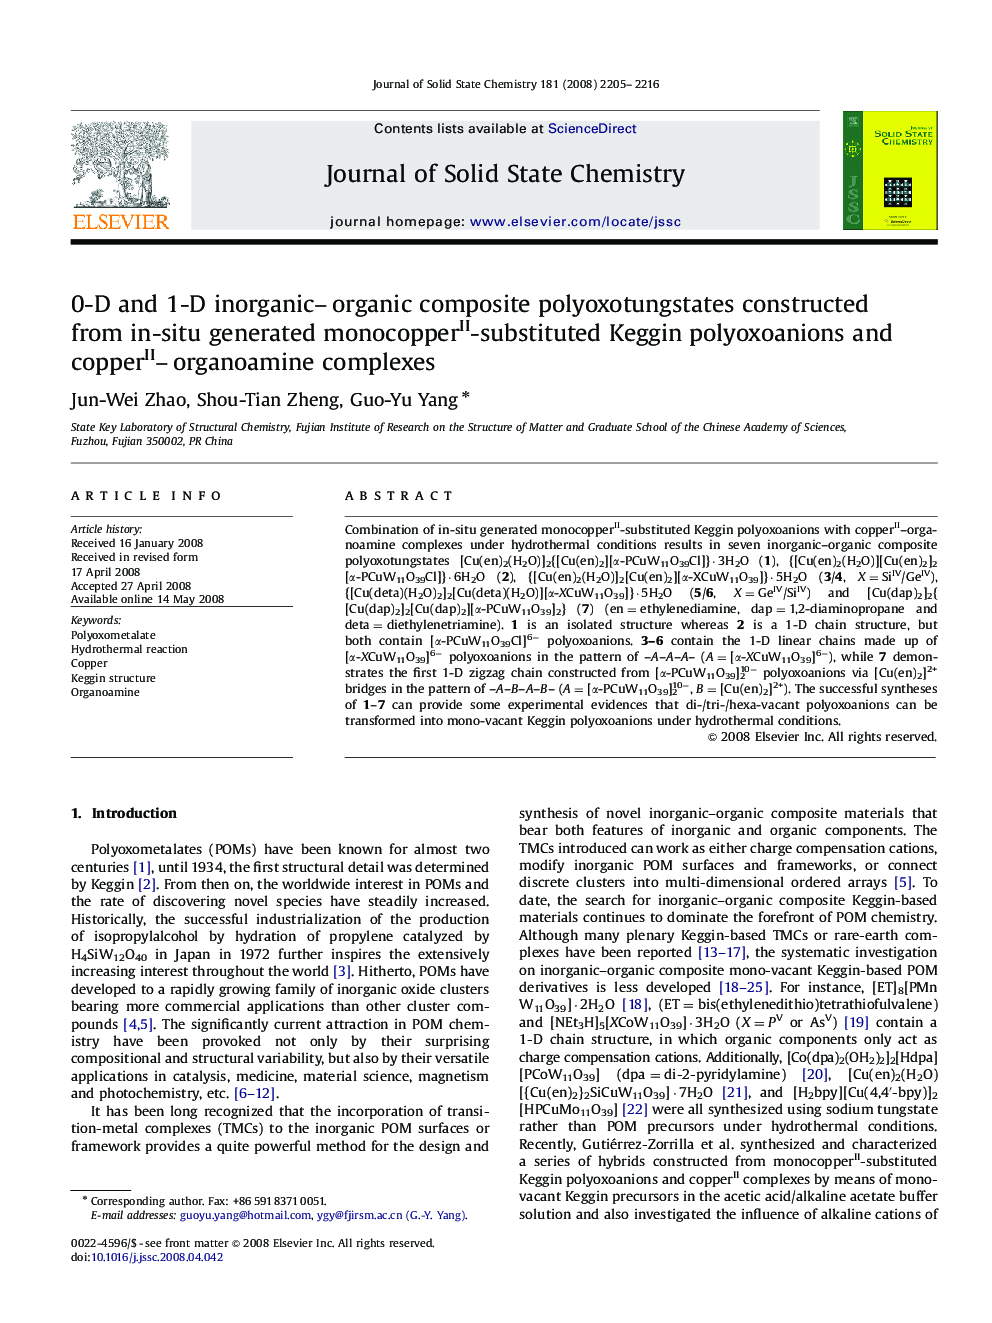 0-D and 1-D inorganic–organic composite polyoxotungstates constructed from in-situ generated monocopperII-substituted Keggin polyoxoanions and copperII–organoamine complexes